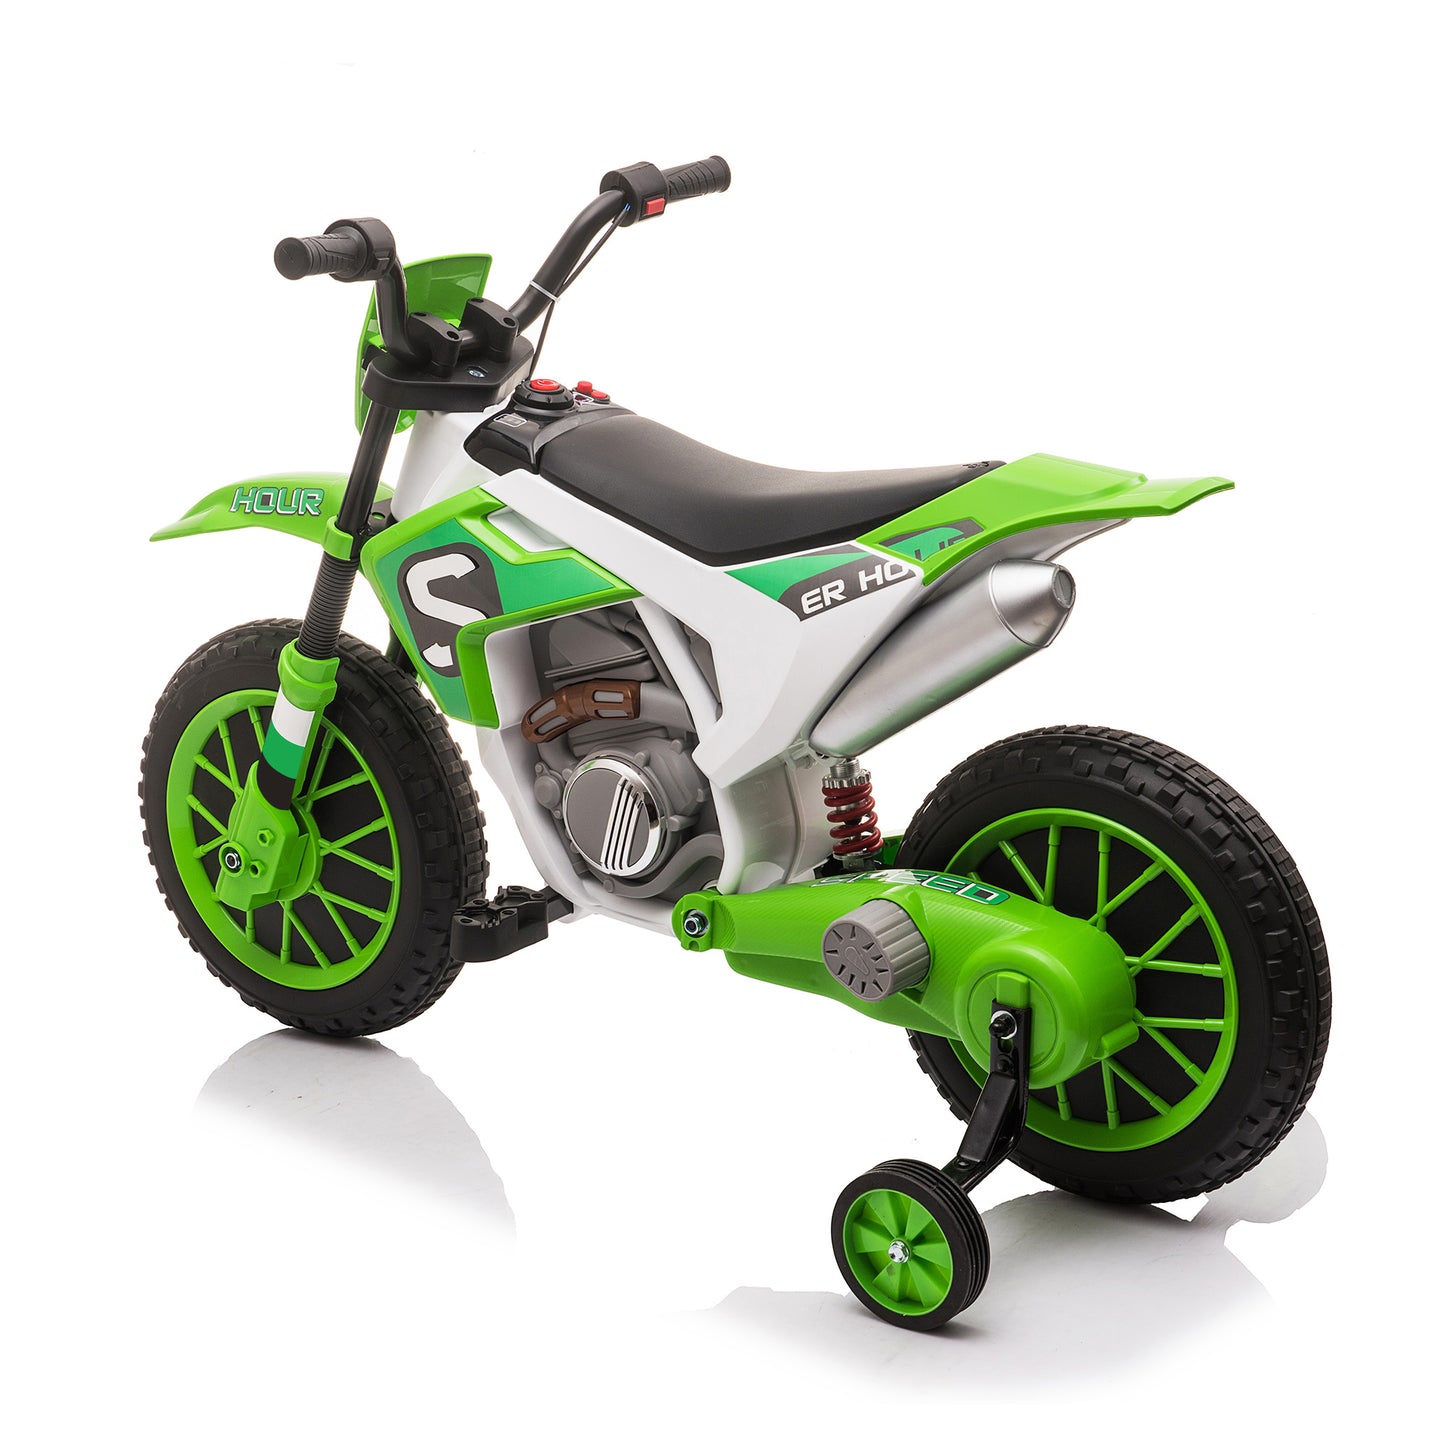 12V Kids Ride on Toy Motorcycle, Electric Motor Toy Bike with Training Wheels for Kids 3-6, Green